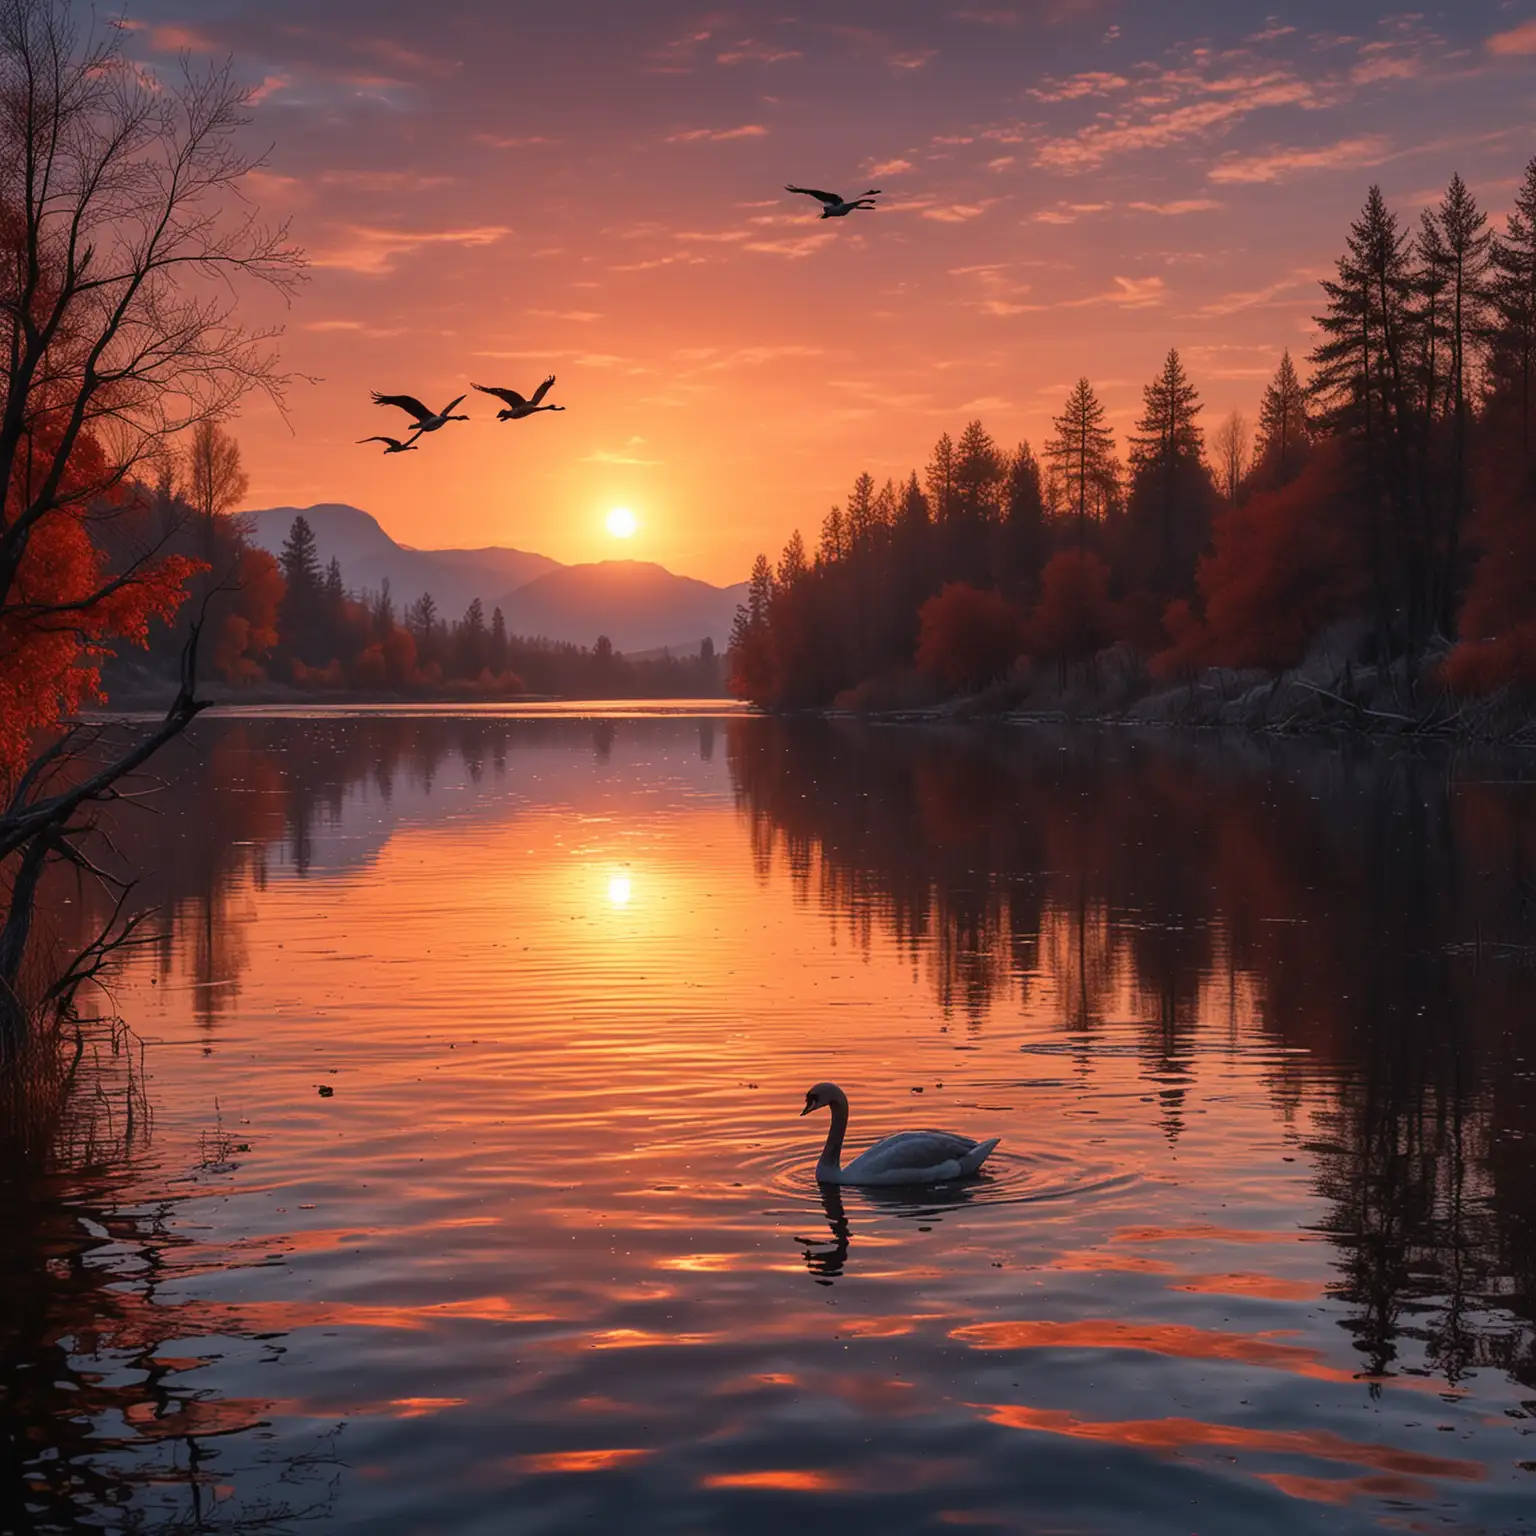 Evening time at the lake, sky turns from orange-red to deep blue, like sunset colors. Water surface reflects the glow of the sky, ripples shining. Several black swans flying gracefully in the sky, wings flashing metallic light under the setting sun. Background trees or mountains add depth to the scene. The whole picture creates a quiet and magnificent atmosphere, highlighting the swan's loneliness with the broadness of the sky and water surface.